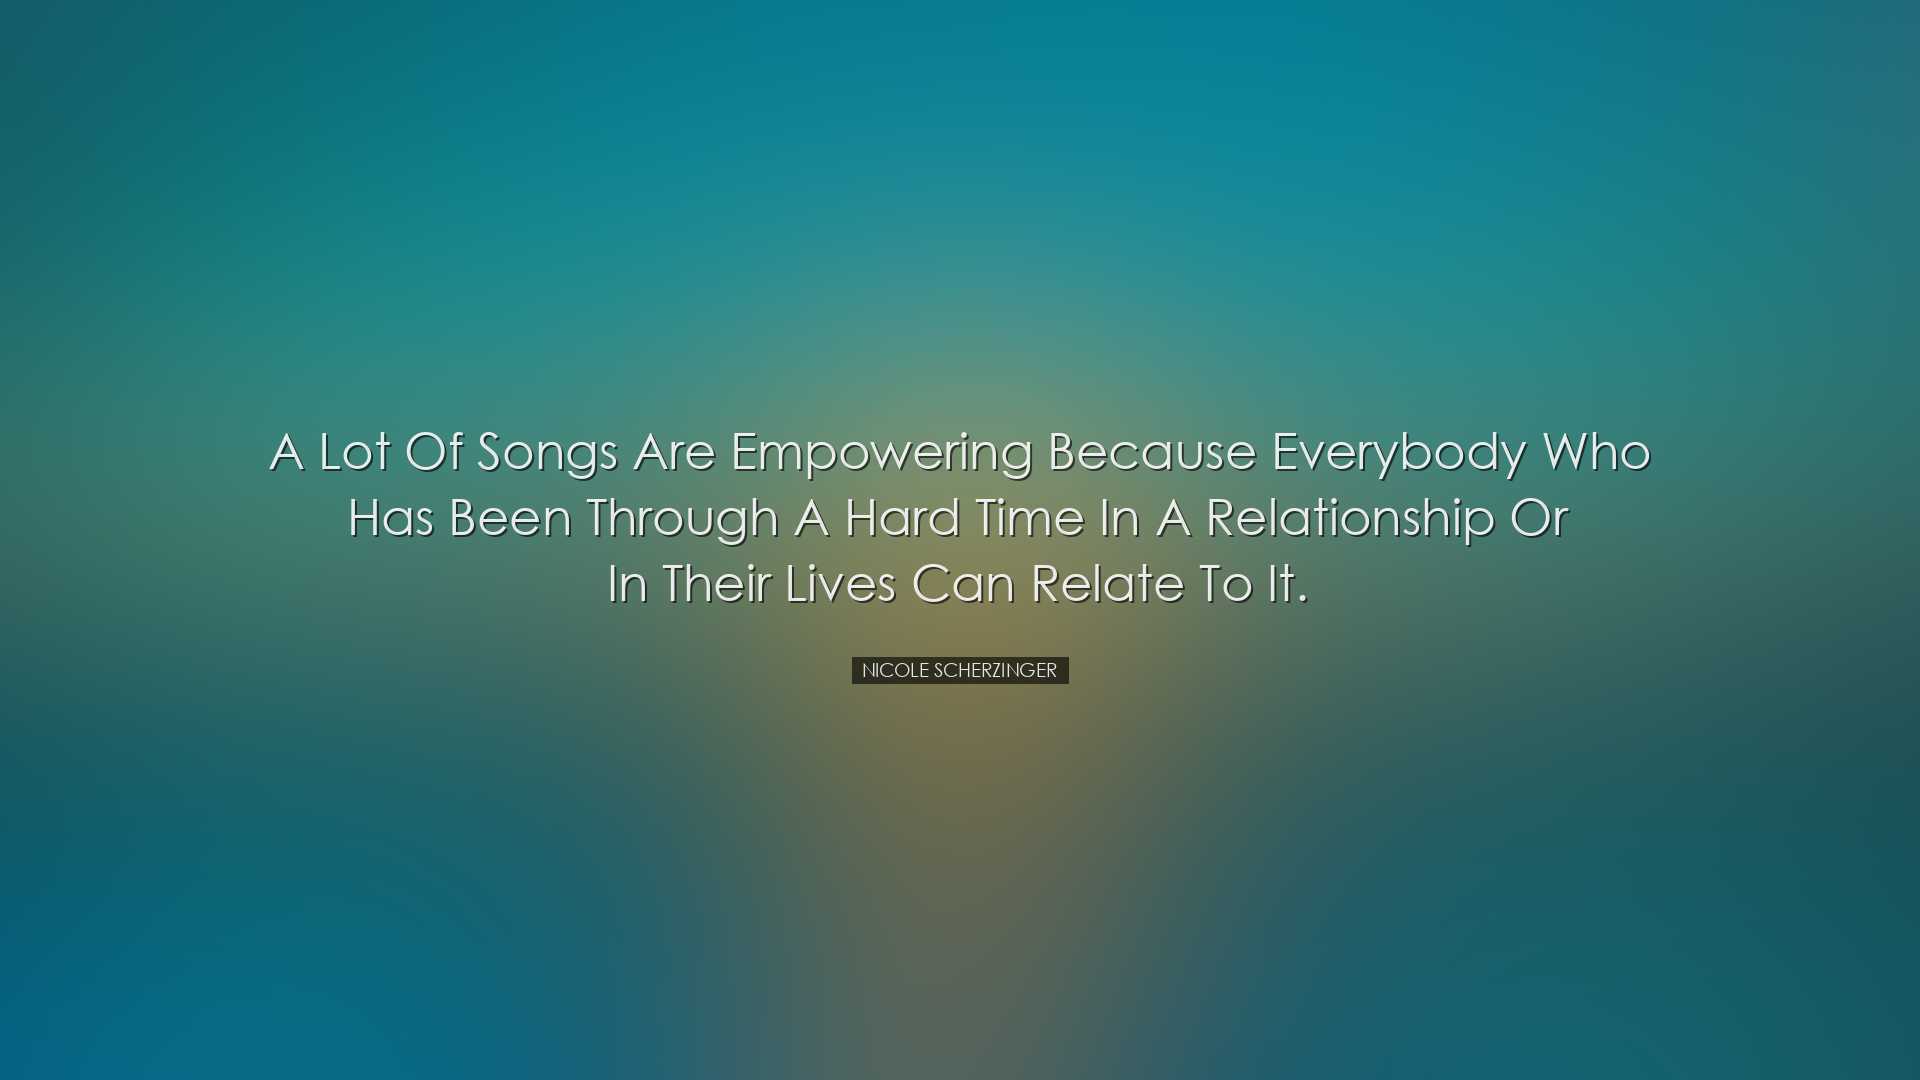 A lot of songs are empowering because everybody who has been throu